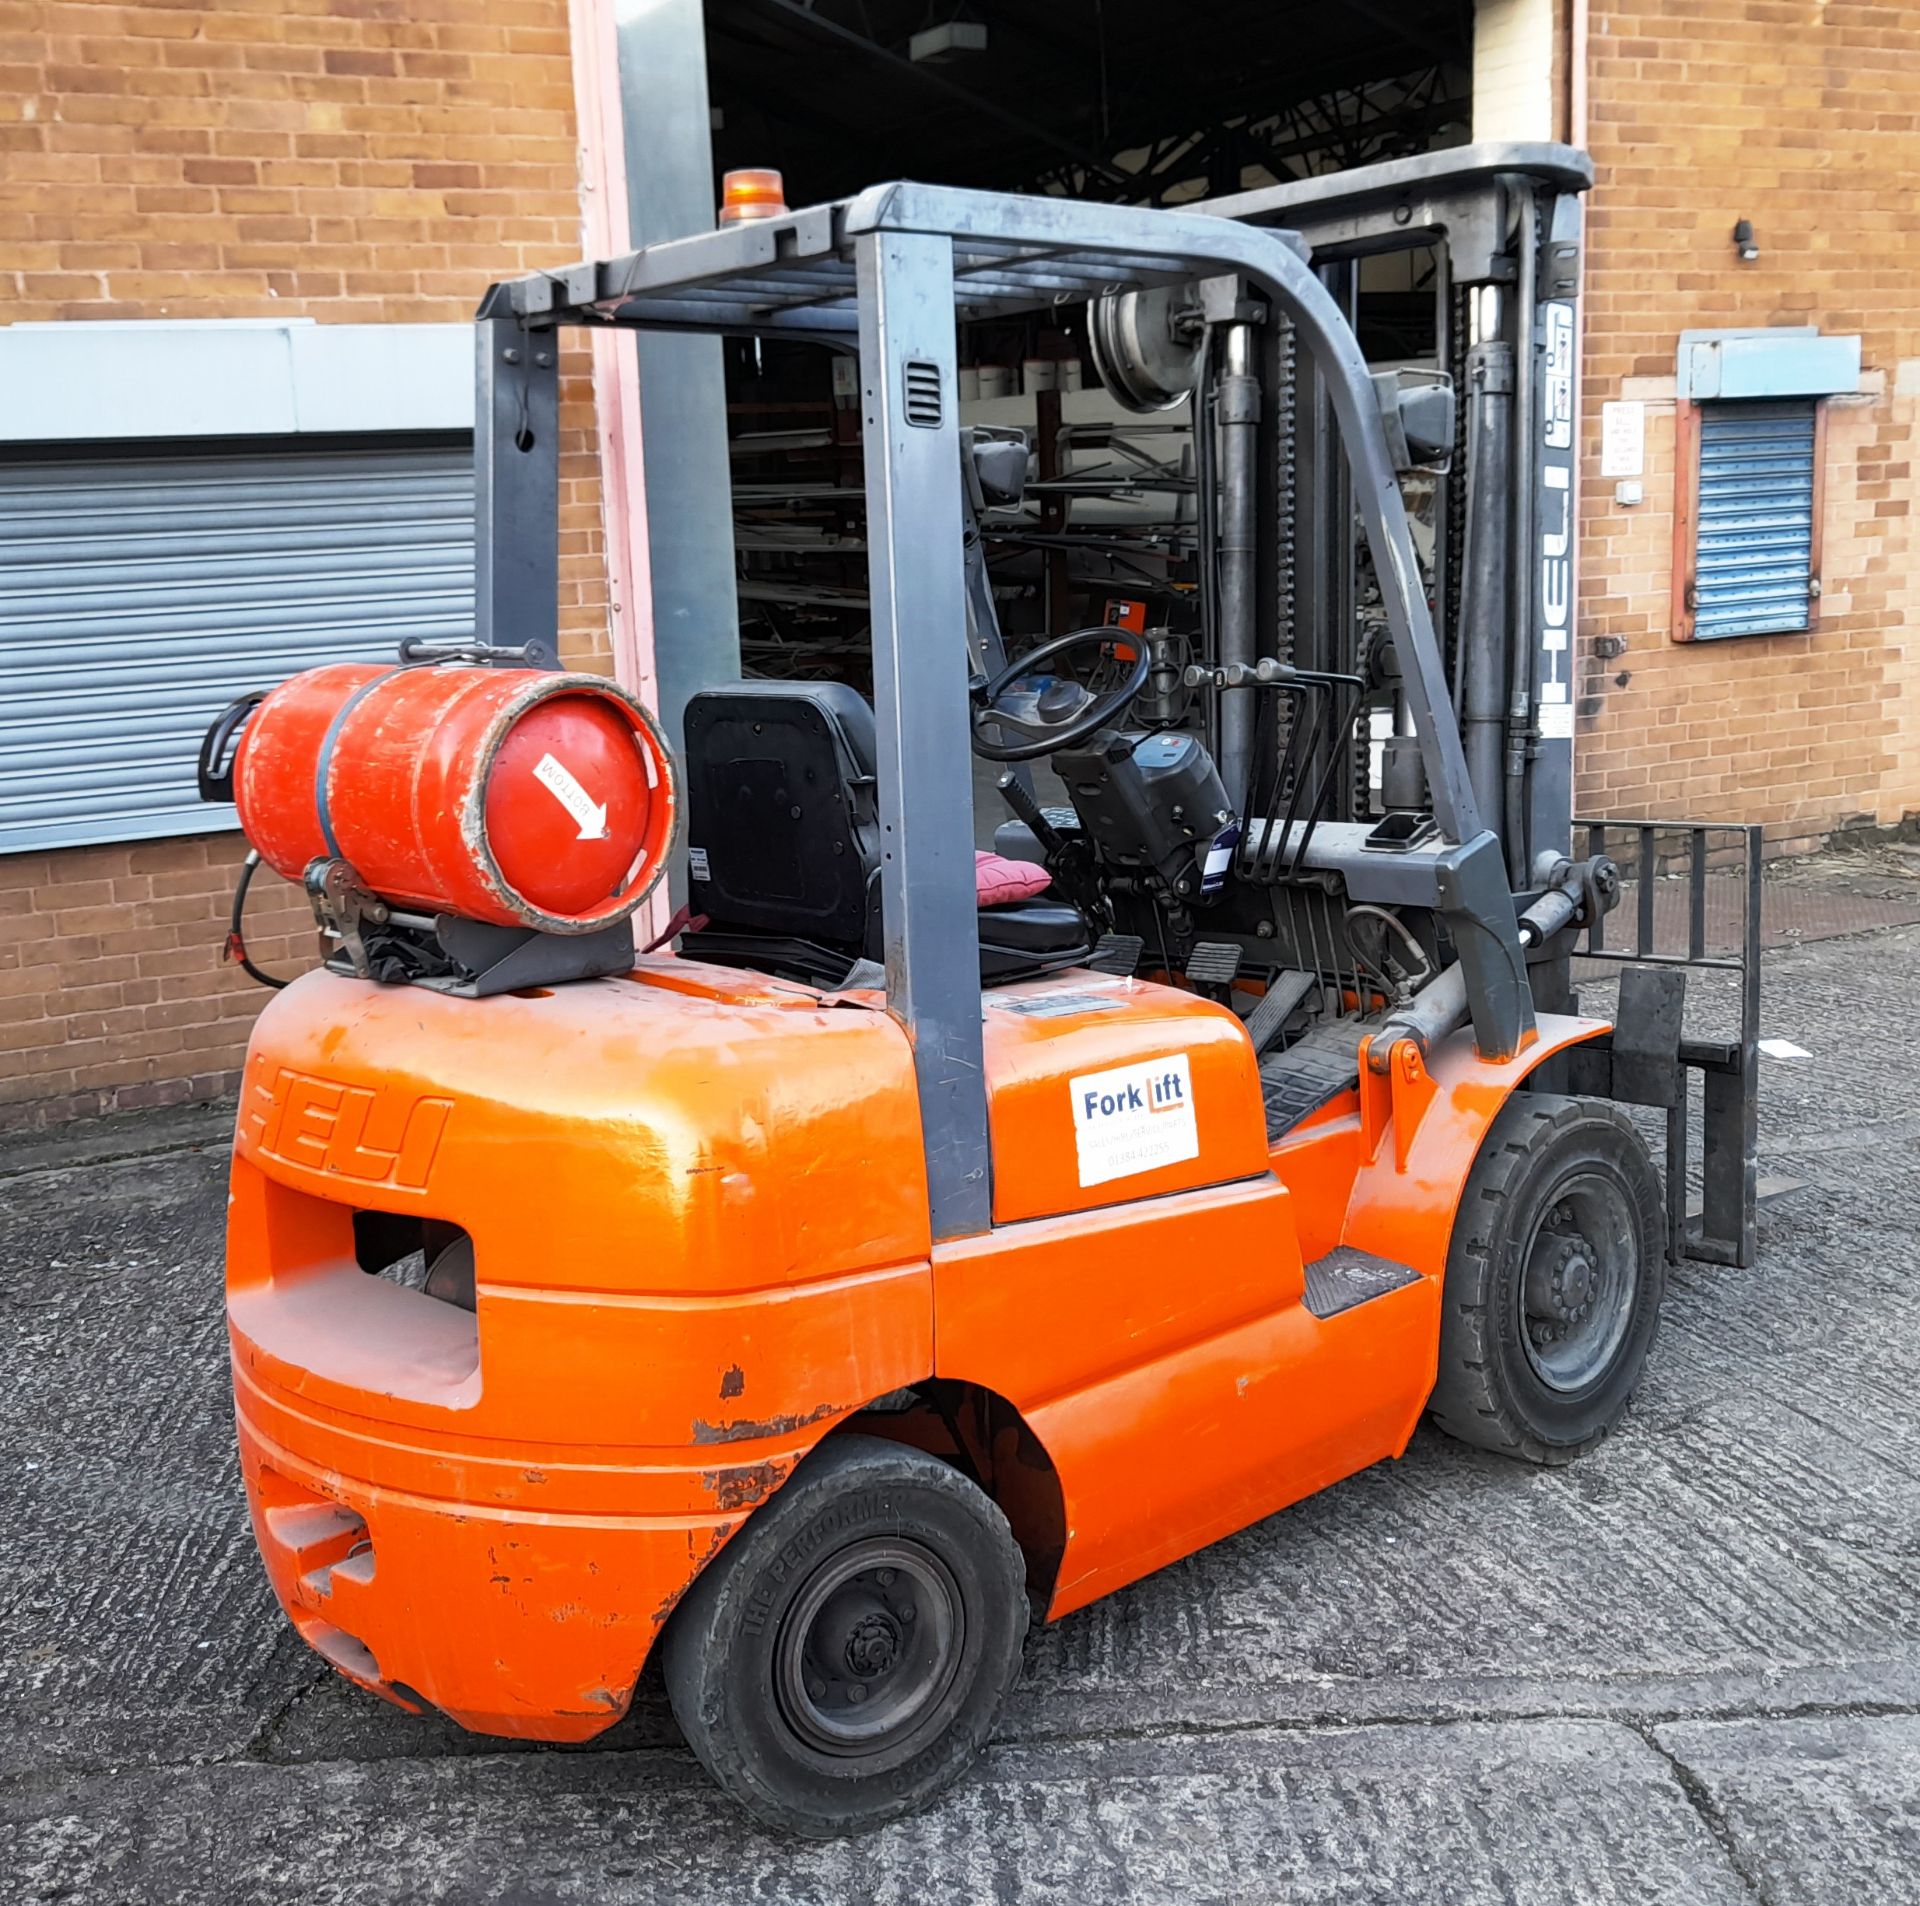 Heli HFG25 LPG forklift truck, Year 2007, Serial Number 0302038099, Rated Capacity 2500KG, Hours - Image 4 of 10